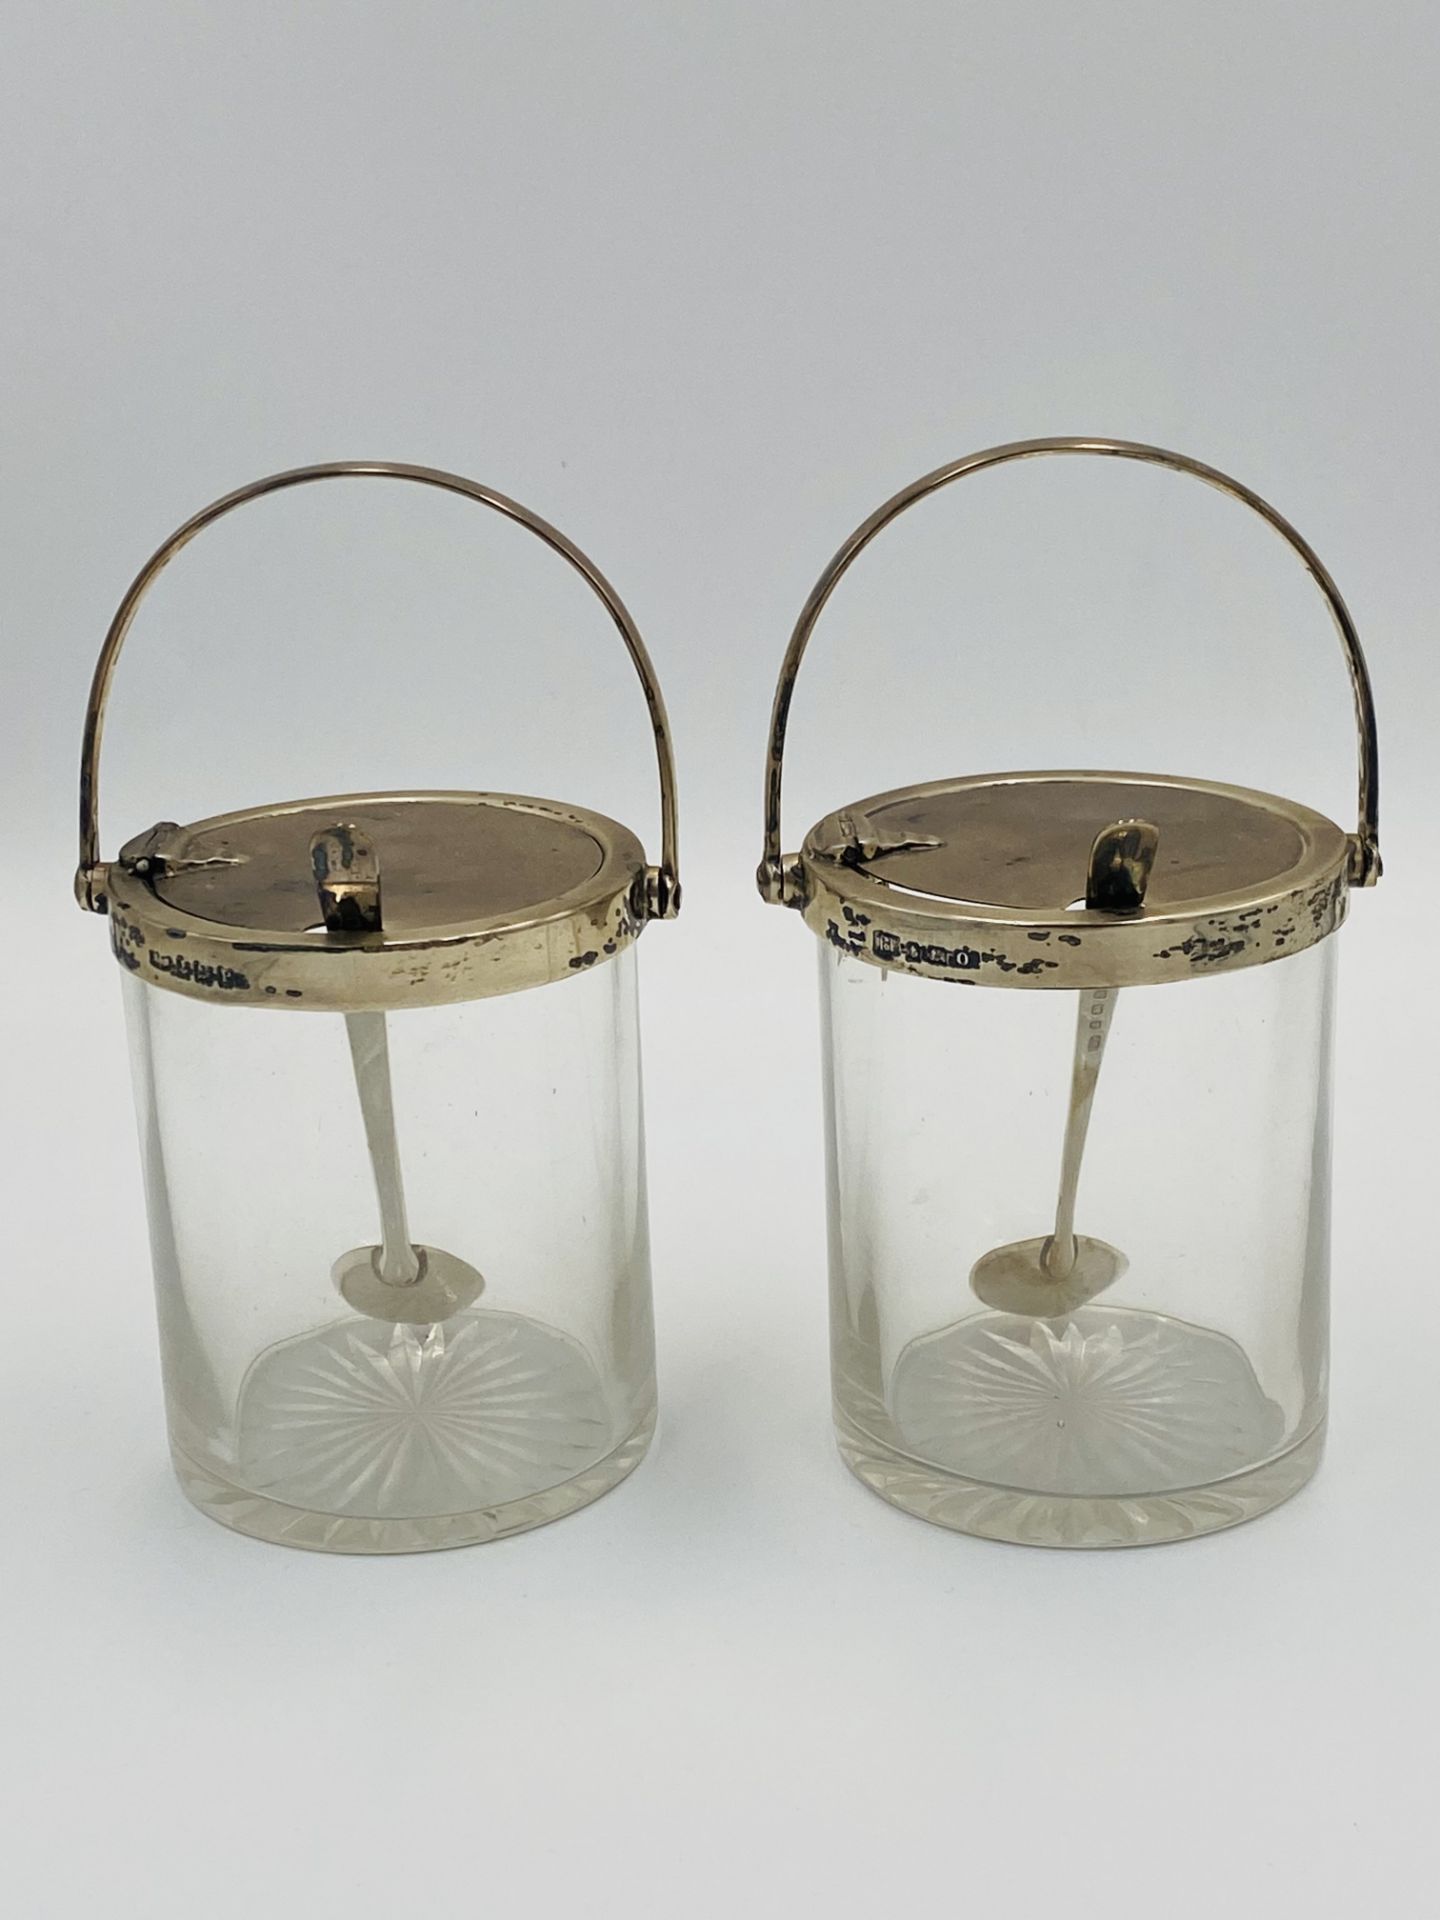 Pair of silver mounted, glass preserve jars with star cut bases - Image 3 of 6